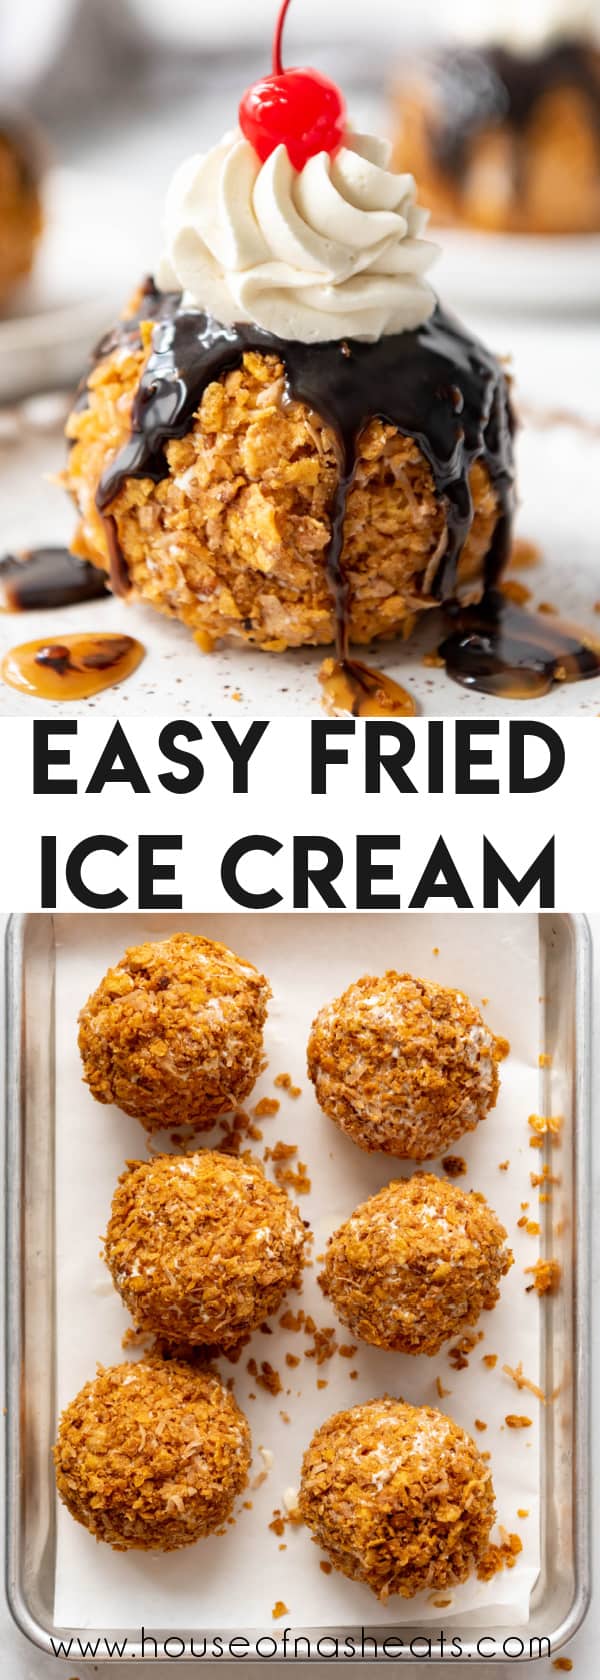 A collage of images of fried ice cream with text overlay.